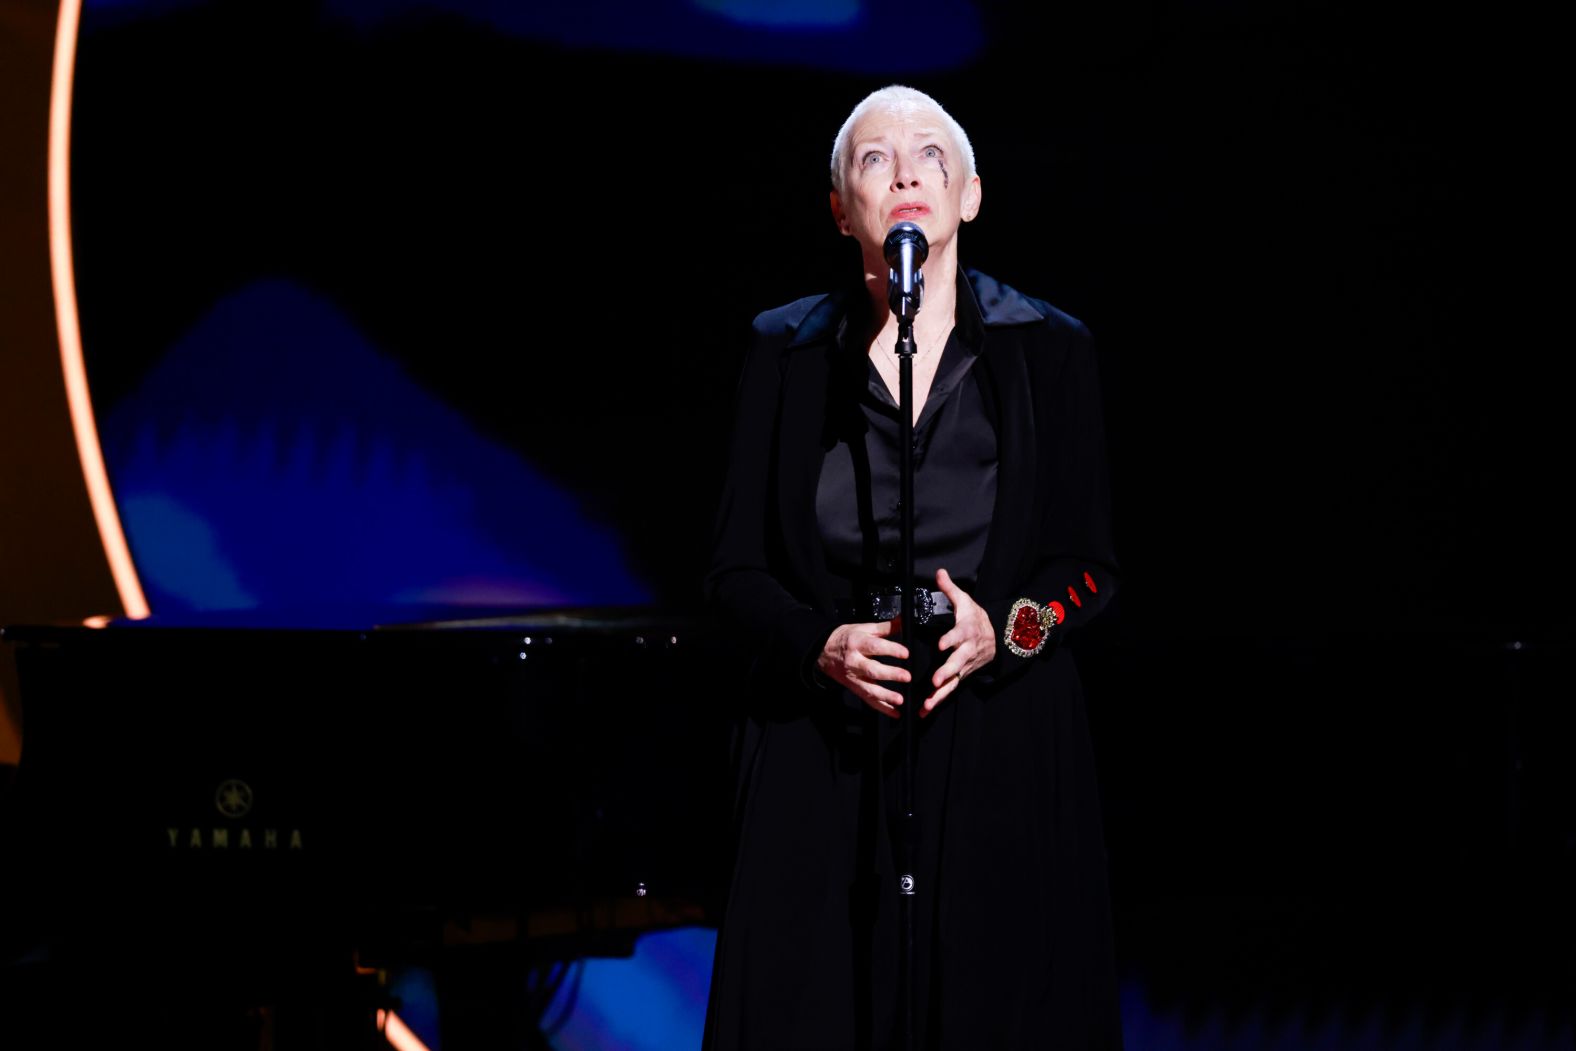 Annie Lennox gives an emotional performance of Sinead O'Connor's "Nothing Compares 2 U." <a href="index.php?page=&url=http%3A%2F%2Fwww.cnn.com%2F2023%2F07%2F26%2Fentertainment%2Fgallery%2Fsinead-oconnor%2Findex.html">O'Connor</a> died in July at the age of 56.